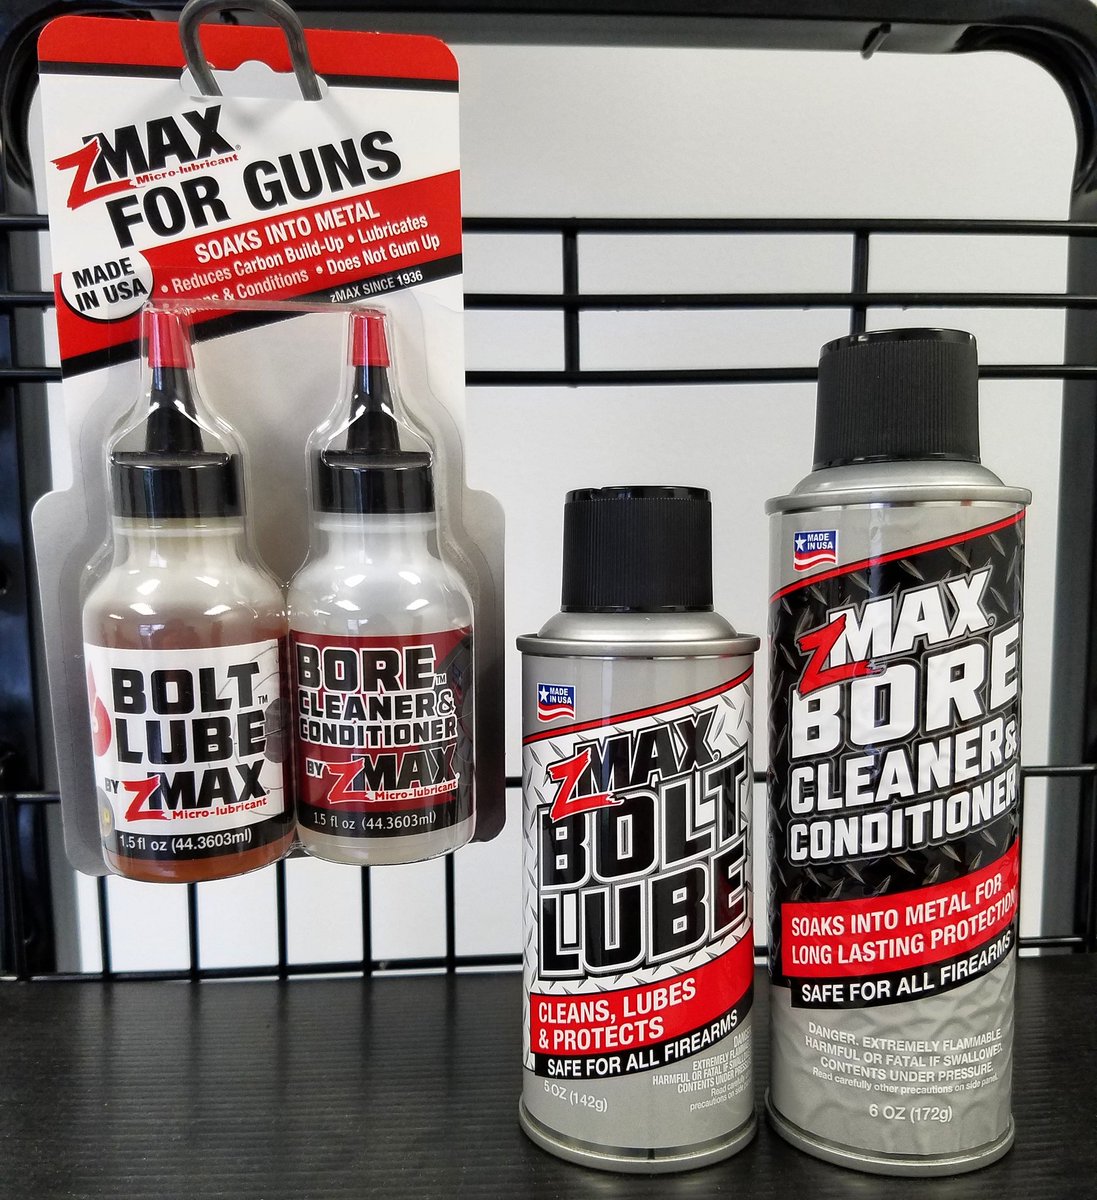 zMAX Bolt Lube & Bore Cleaner ✅ Cleans, conditions and protects ❌ Doesn't gum up ⚠️ Perfect for frequent firing or in storage 👌 Safe for all firearms